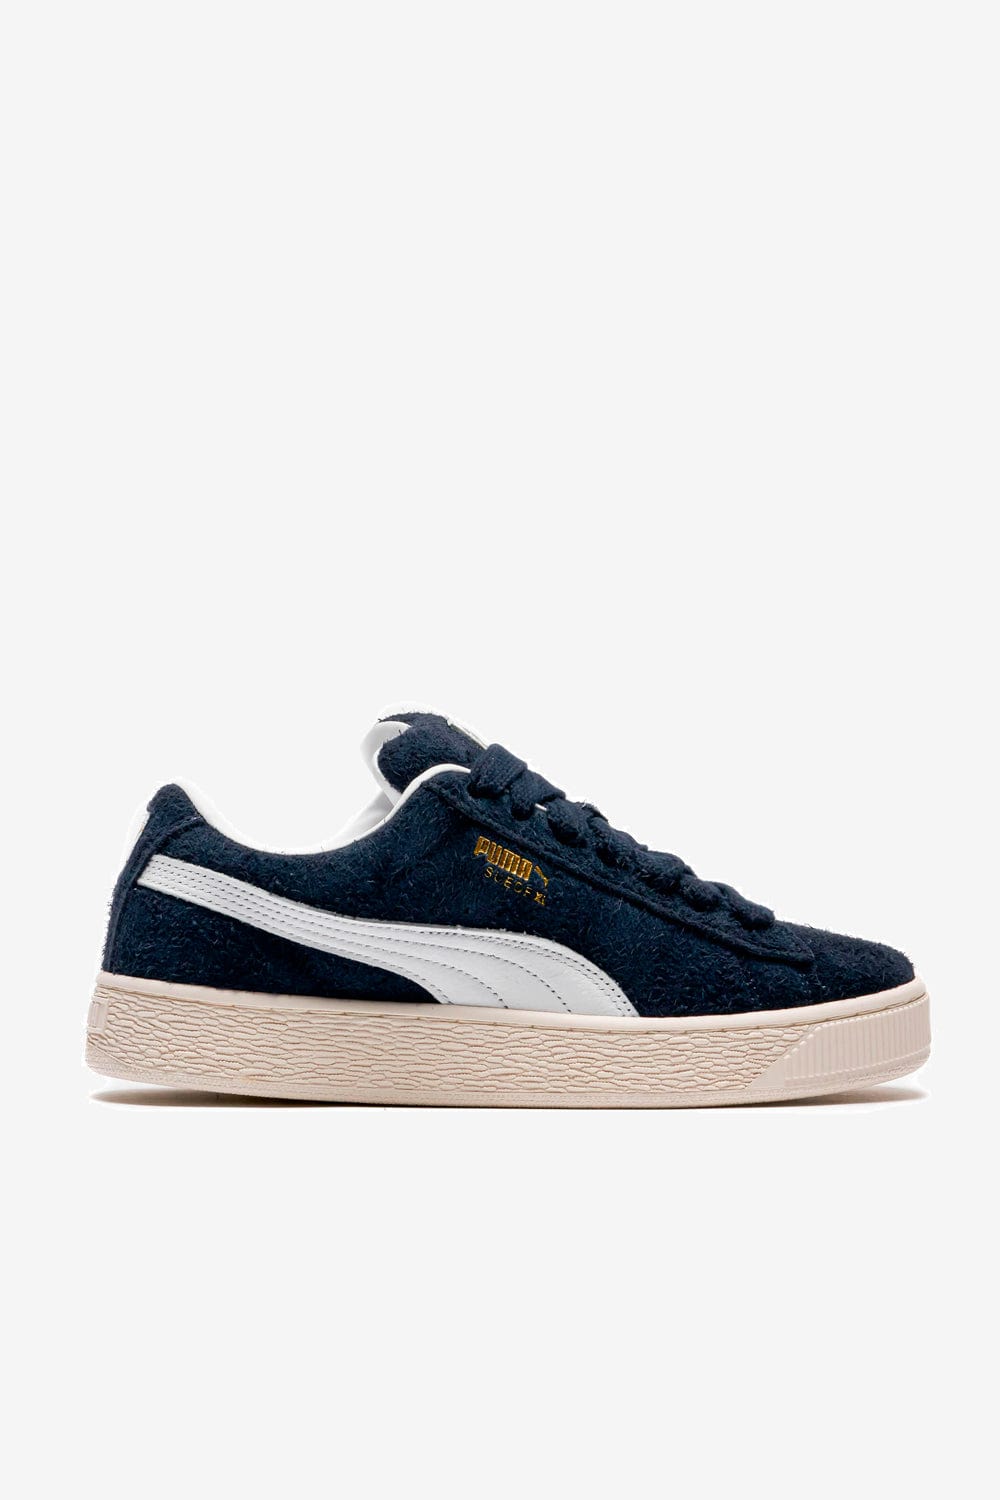 PUMA Suede XL Hairy (Club Navy/Frosted Ivory)